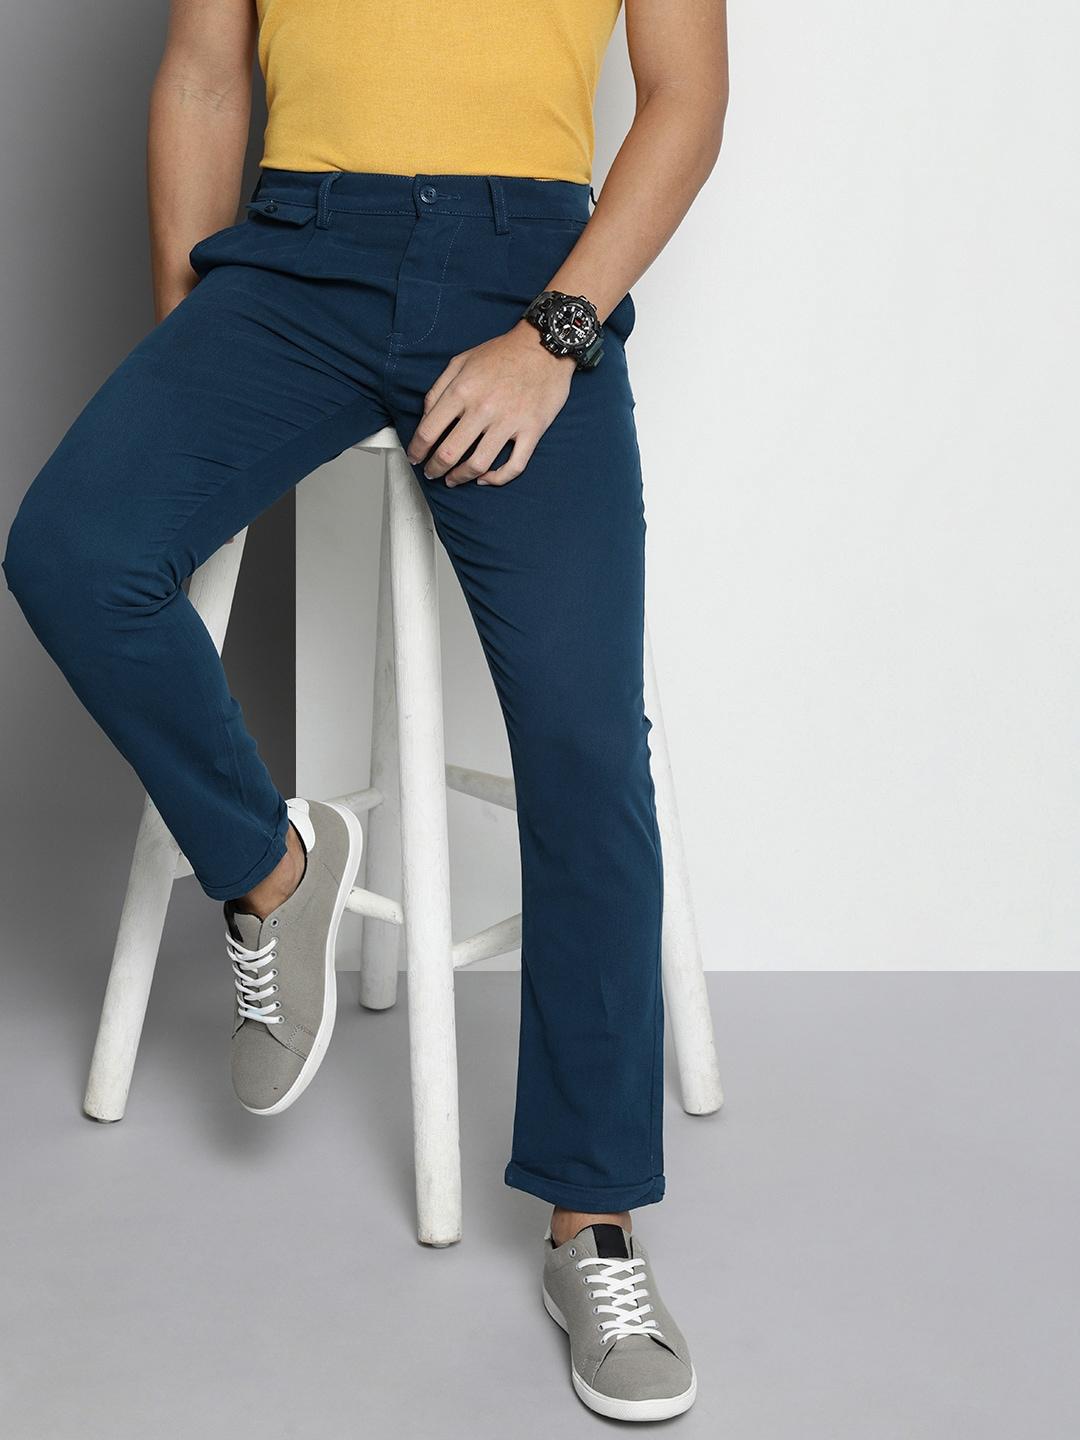 The Indian Garage Co Men Cotton Slim Fit Chinos